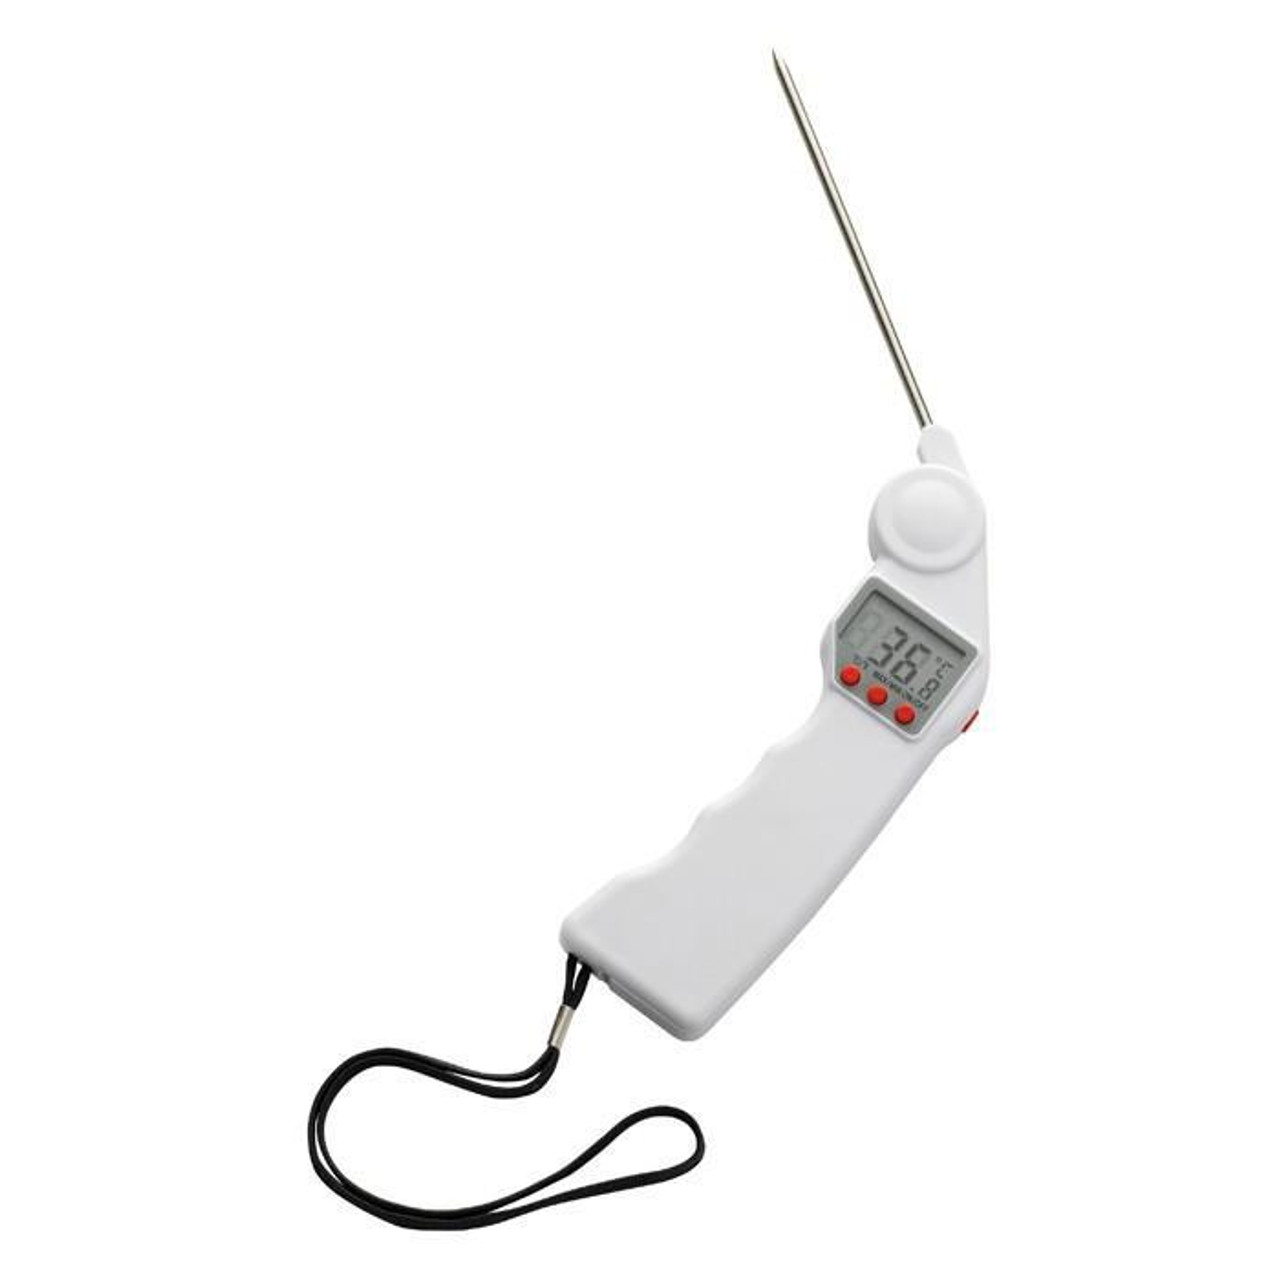 https://cdn11.bigcommerce.com/s-4vlom1cd/images/stencil/1280x1280/products/2387/11479/Hark_Digital_Thermometer_with_Folding_Probe__24110.1578308112.jpg?c=3